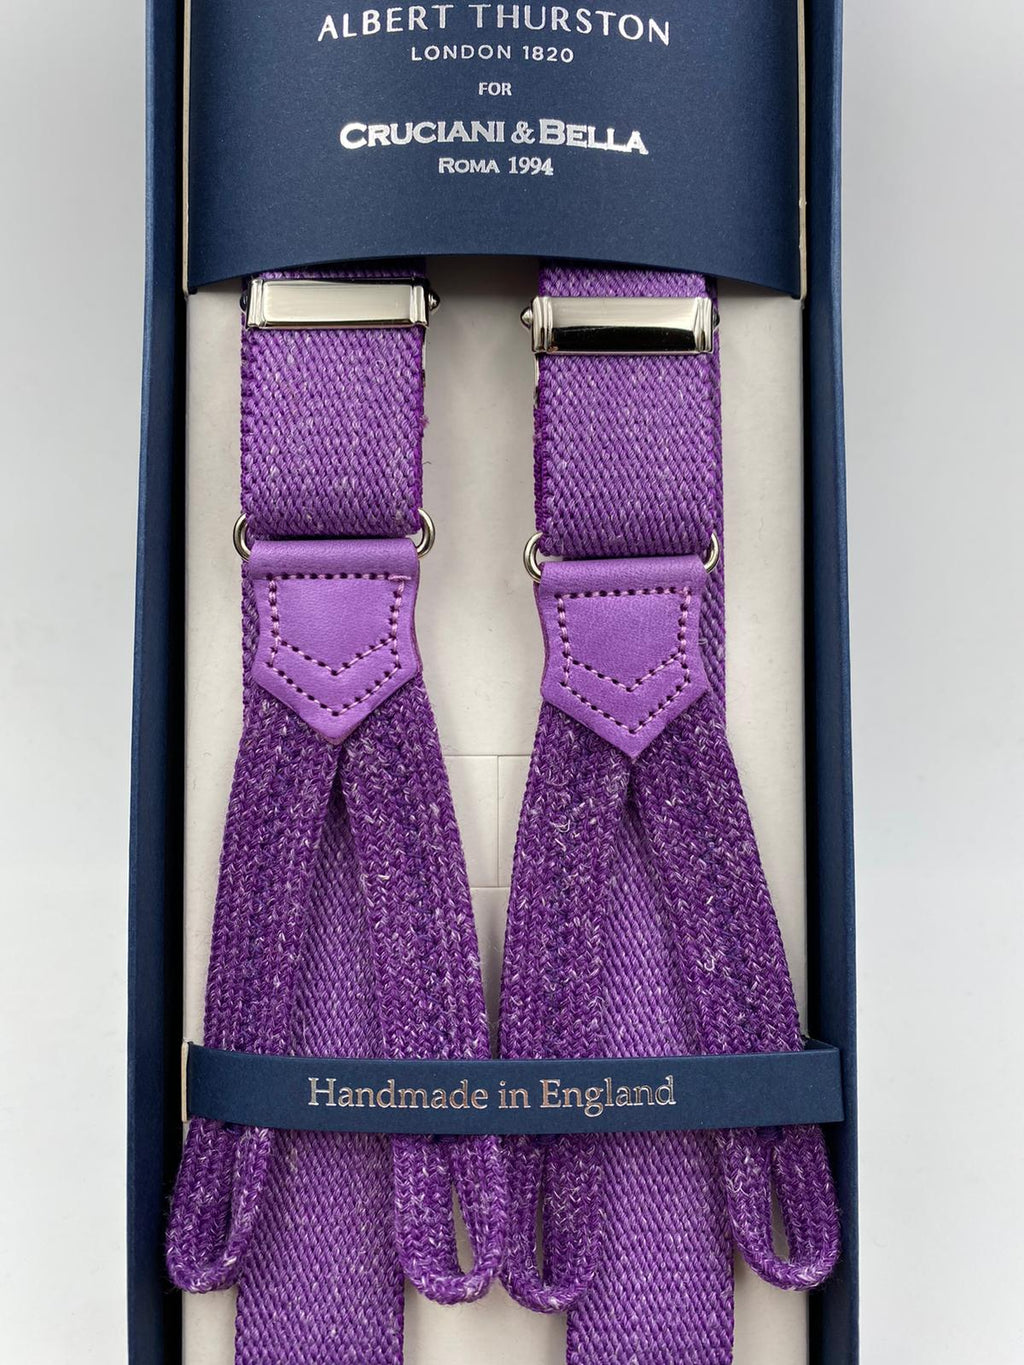 Albert Thurston for Cruciani & Bella Made in England Adjustable Sizing 25 mm elastic braces Purple Plain Braid ends Y-Shaped Nickel Fittings Size: L #4897